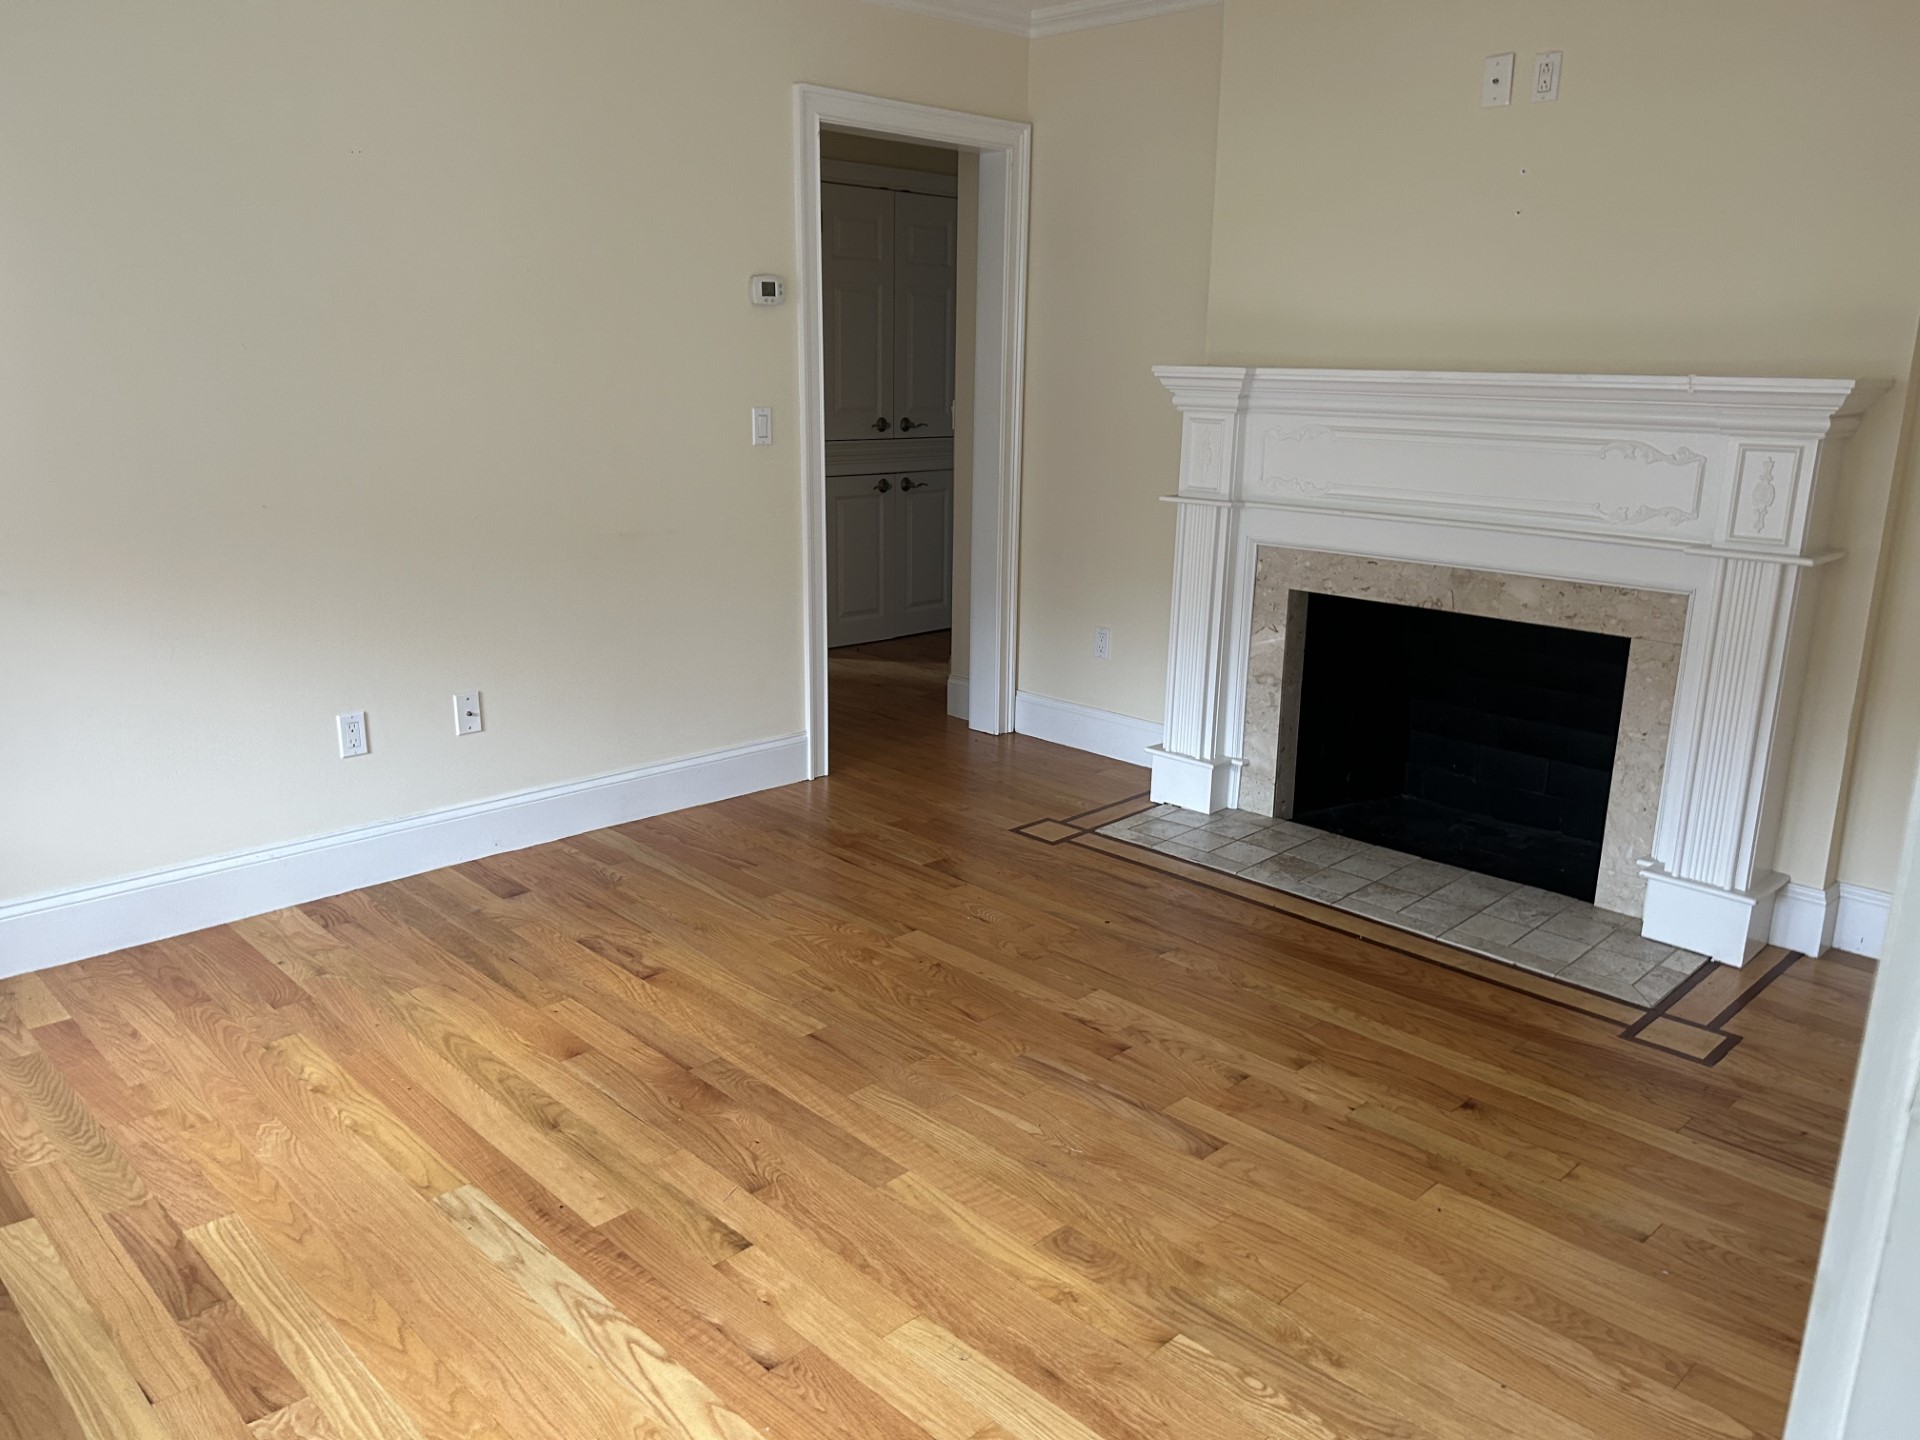 Photos of apartment on Beaconsfield Rd.,Brookline MA 02445